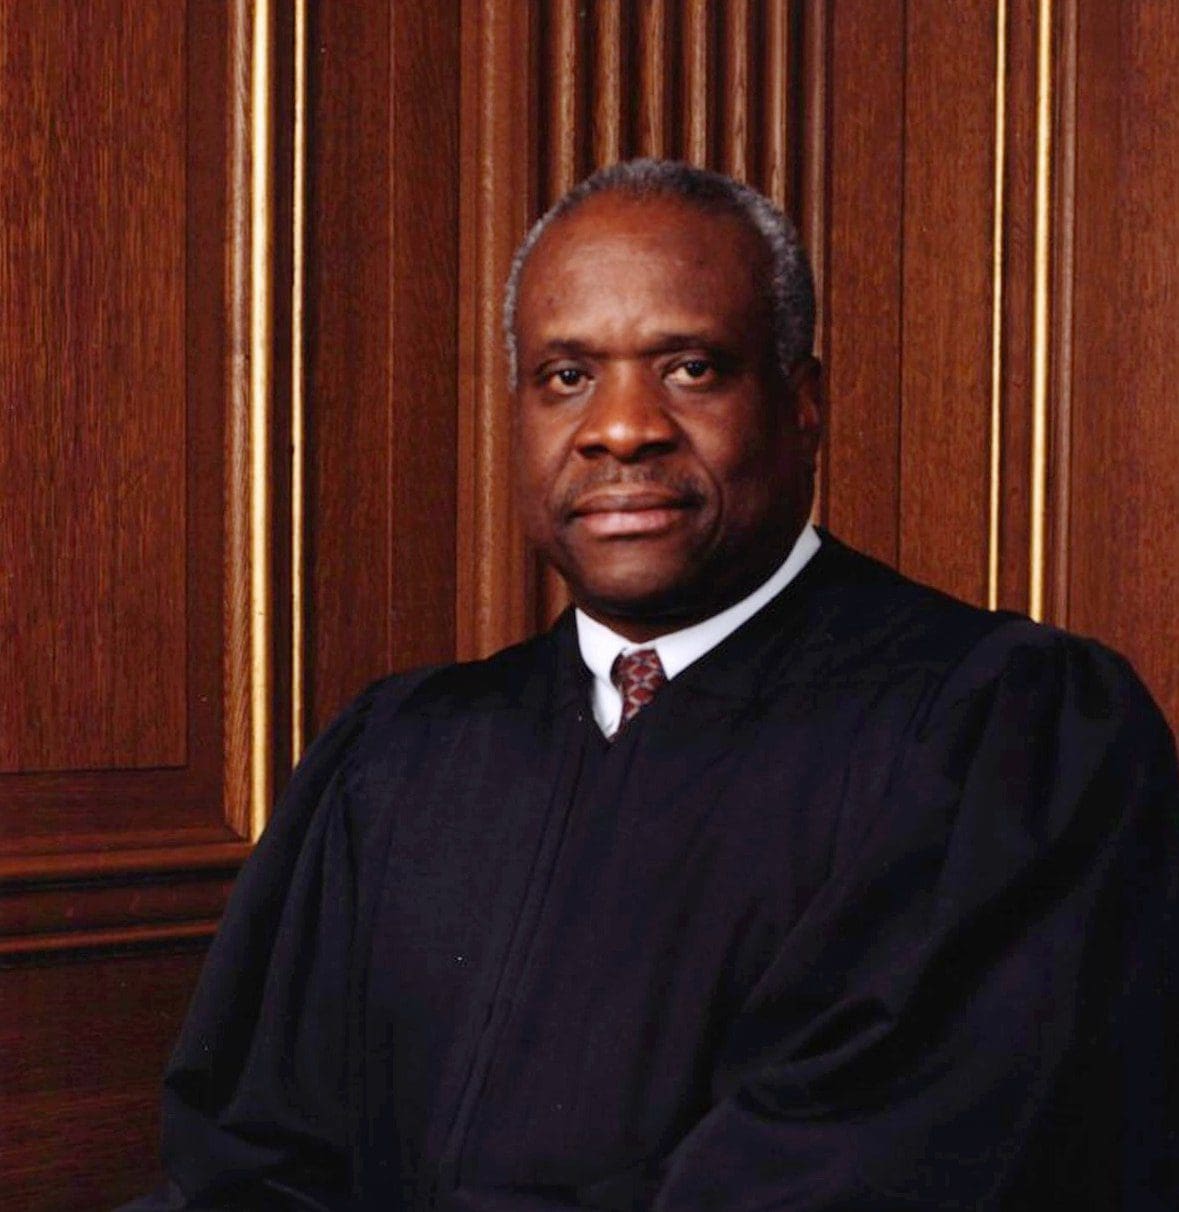 In Texas Speech Clarence Thomas Takes Aim at the Administrative State ...